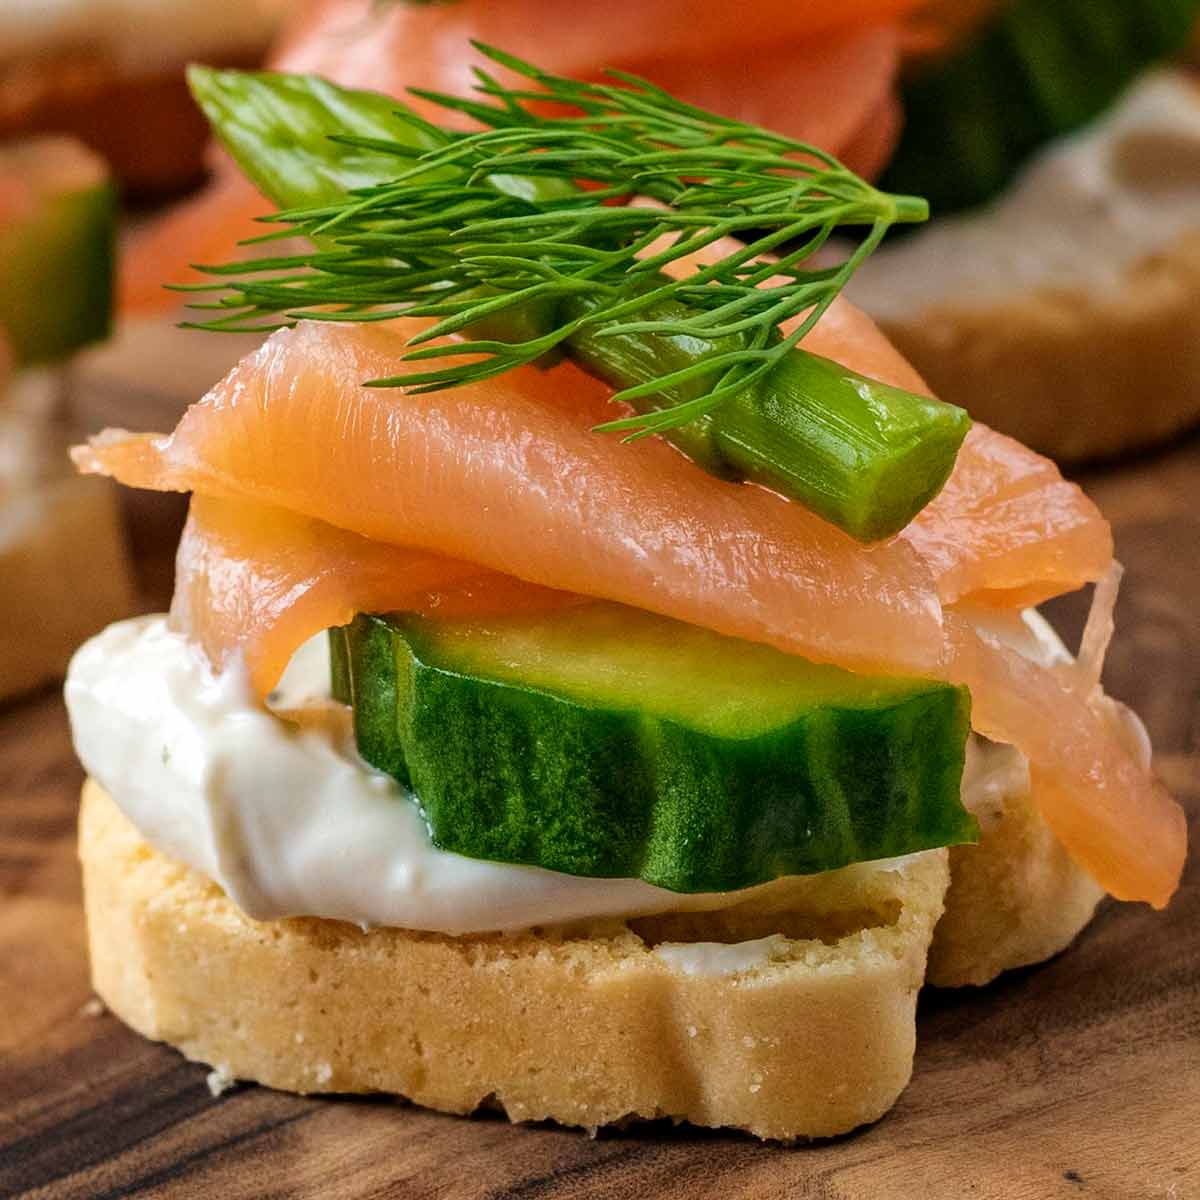 https://hungryhealthyhappy.com/wp-content/uploads/2021/10/Smoked-Salmon-Canapes-featured-b.jpg